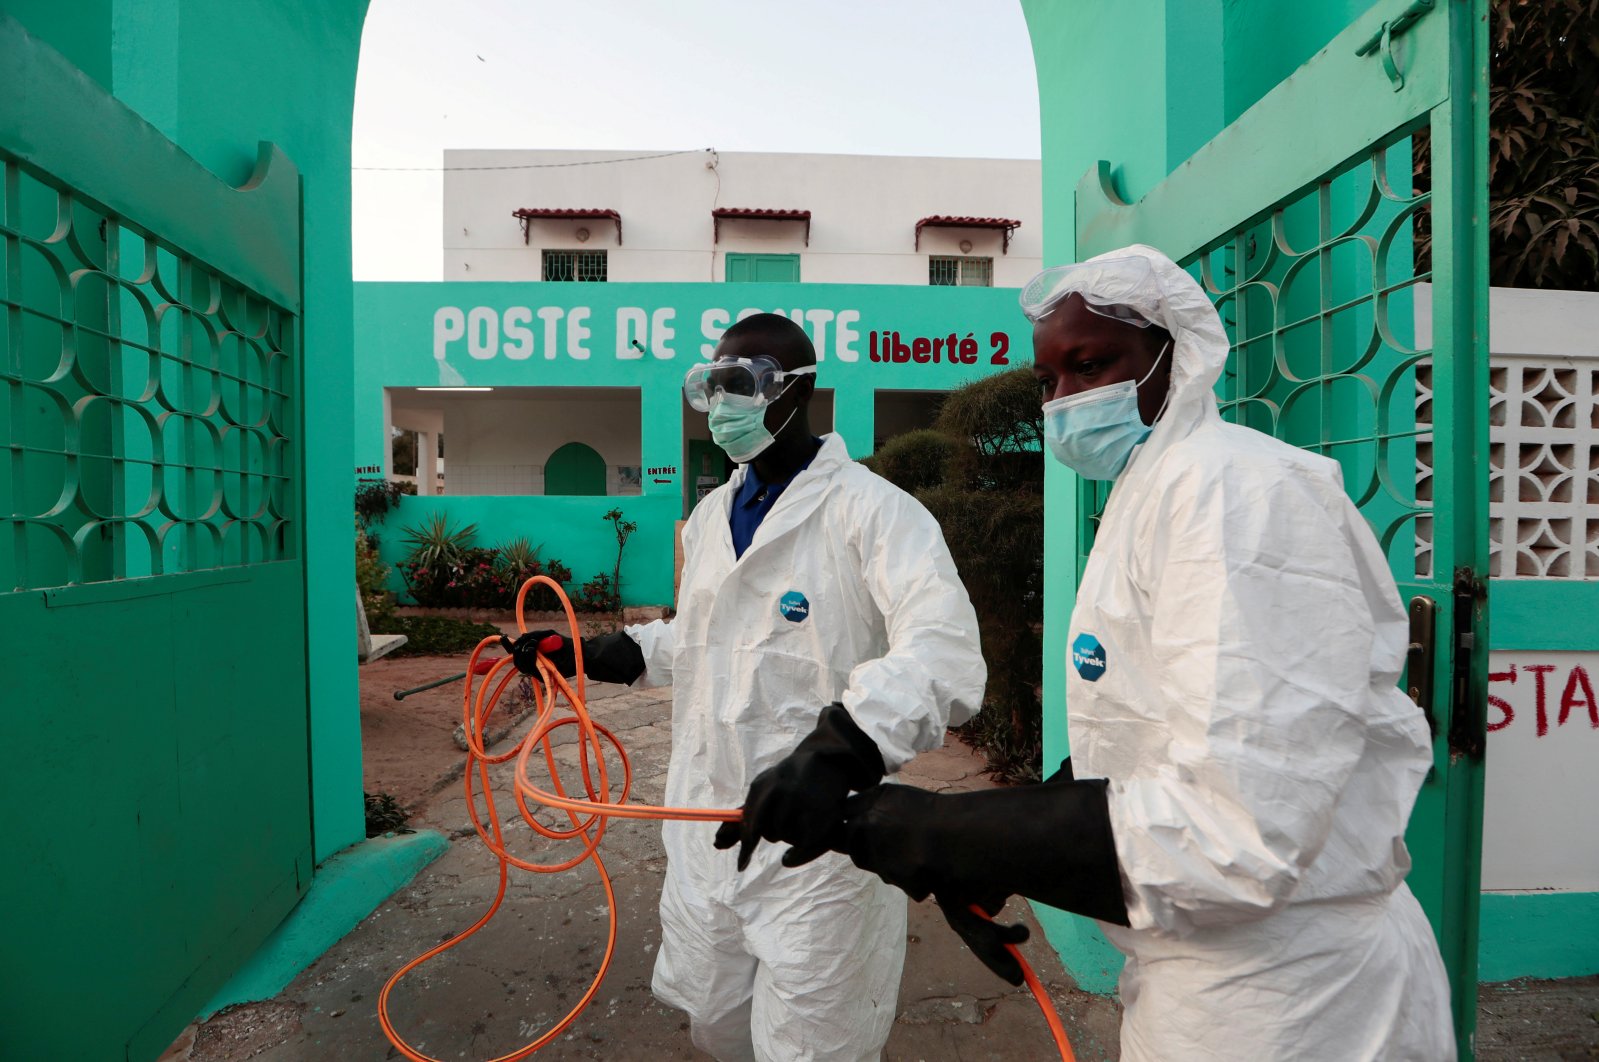 Members of local hygiene services wear protective suits and face masks, as they prepare to disinfect a health center to stop the spread of COVID-19 in Dakar, Senegal, Wednesday, April 1, 2020. (Reuters Photo)